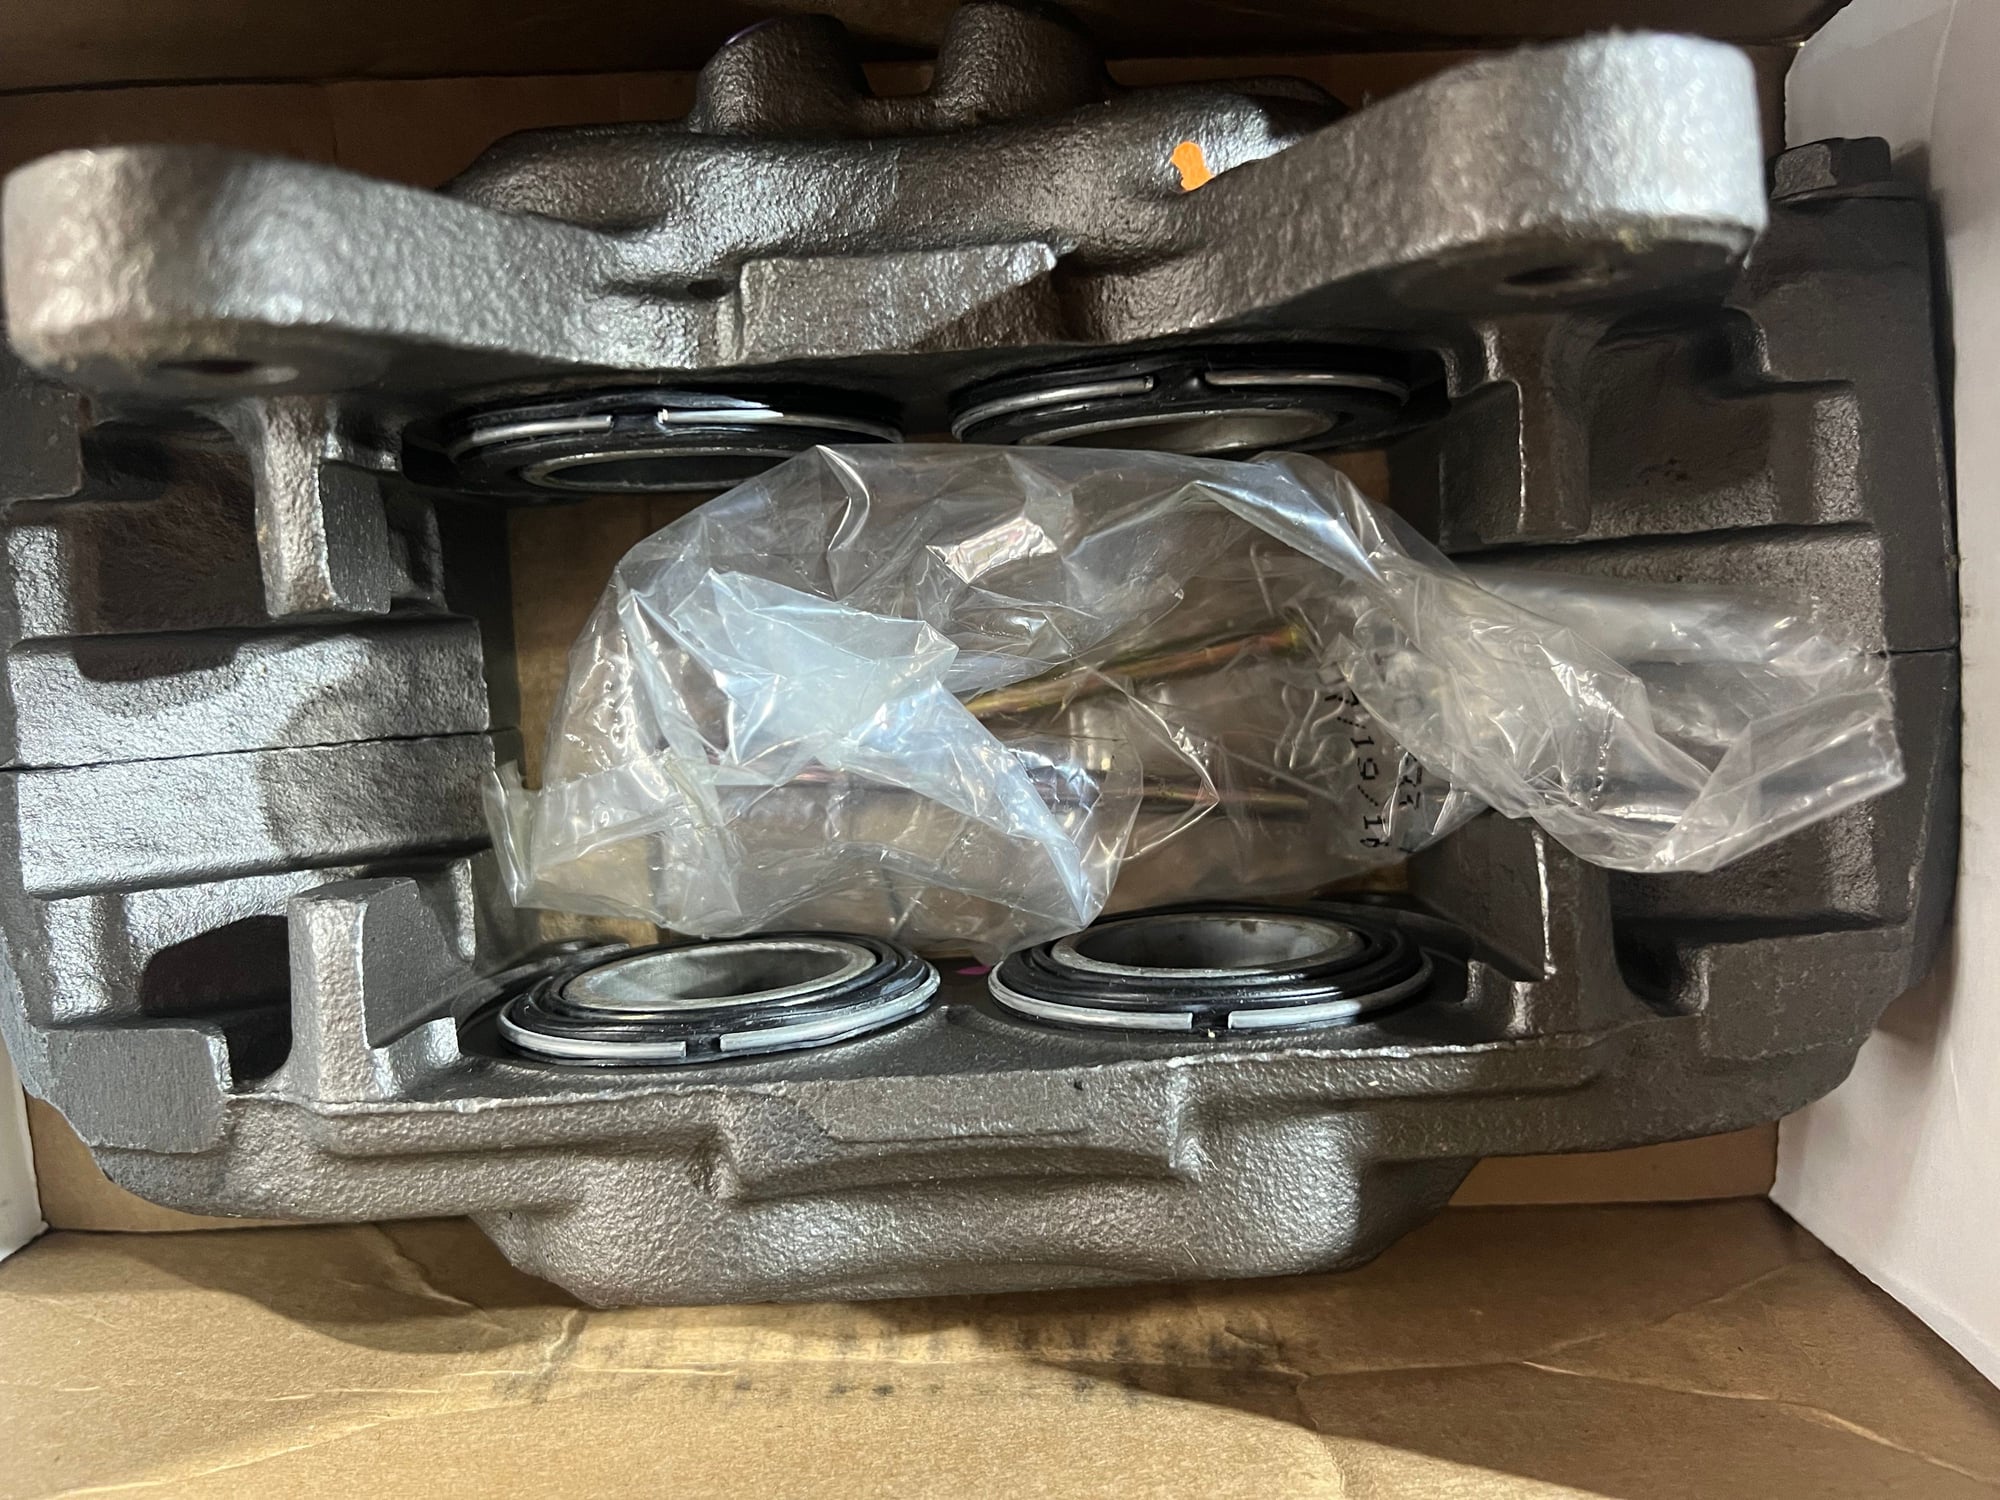 Miscellaneous - OEM Brake Pads, Windshield Wipers and More GX460 - New - 2003 to 2009 Lexus GX470 - Lewes, DE 19958, United States